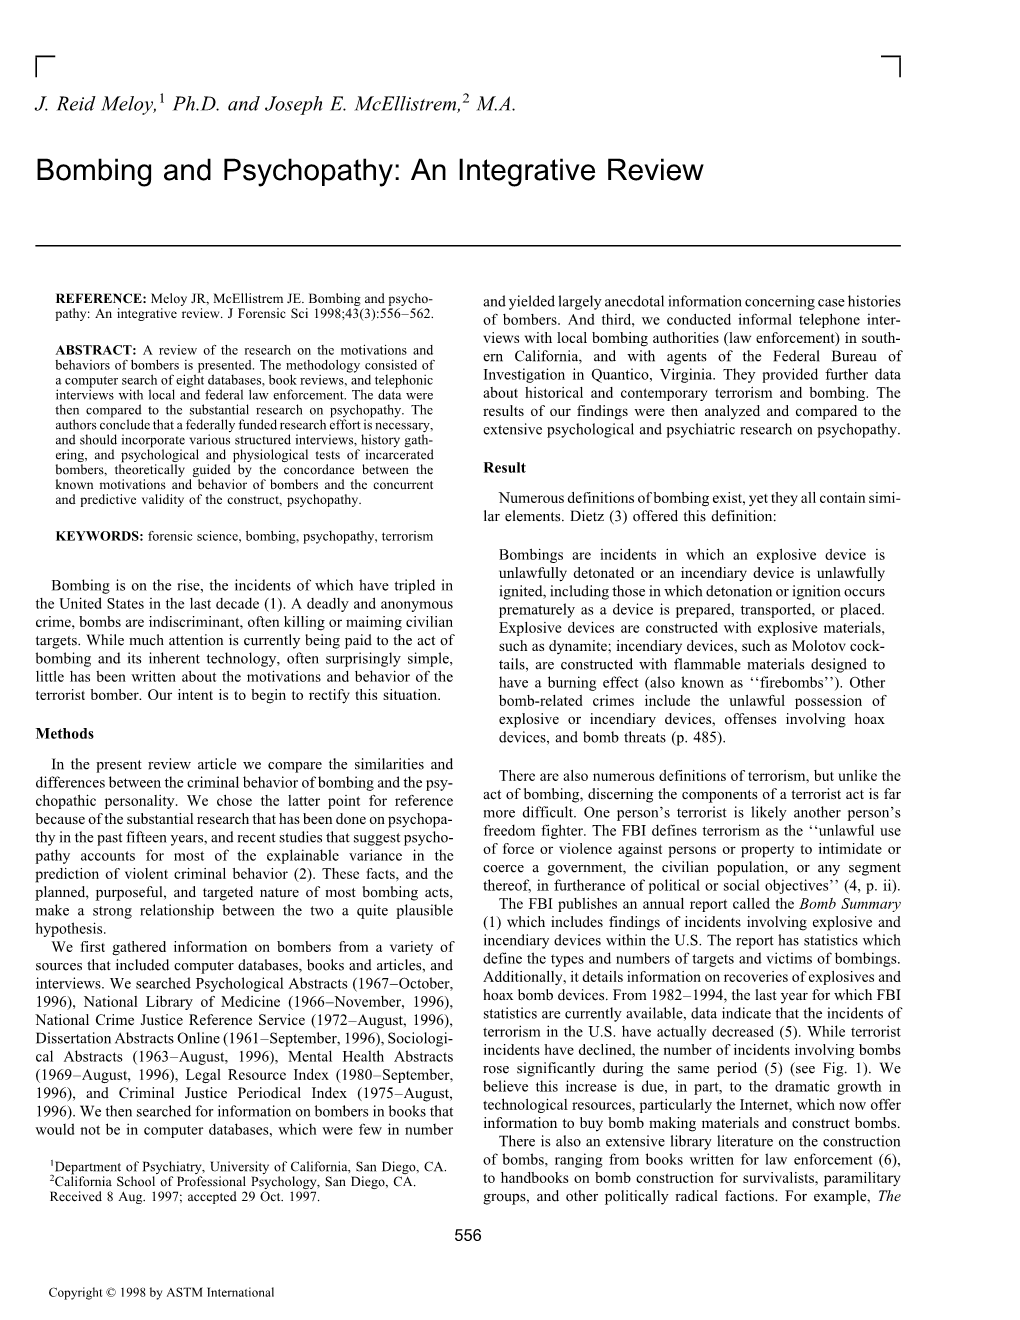 Bombing and Psychopathy: an Integrative Review